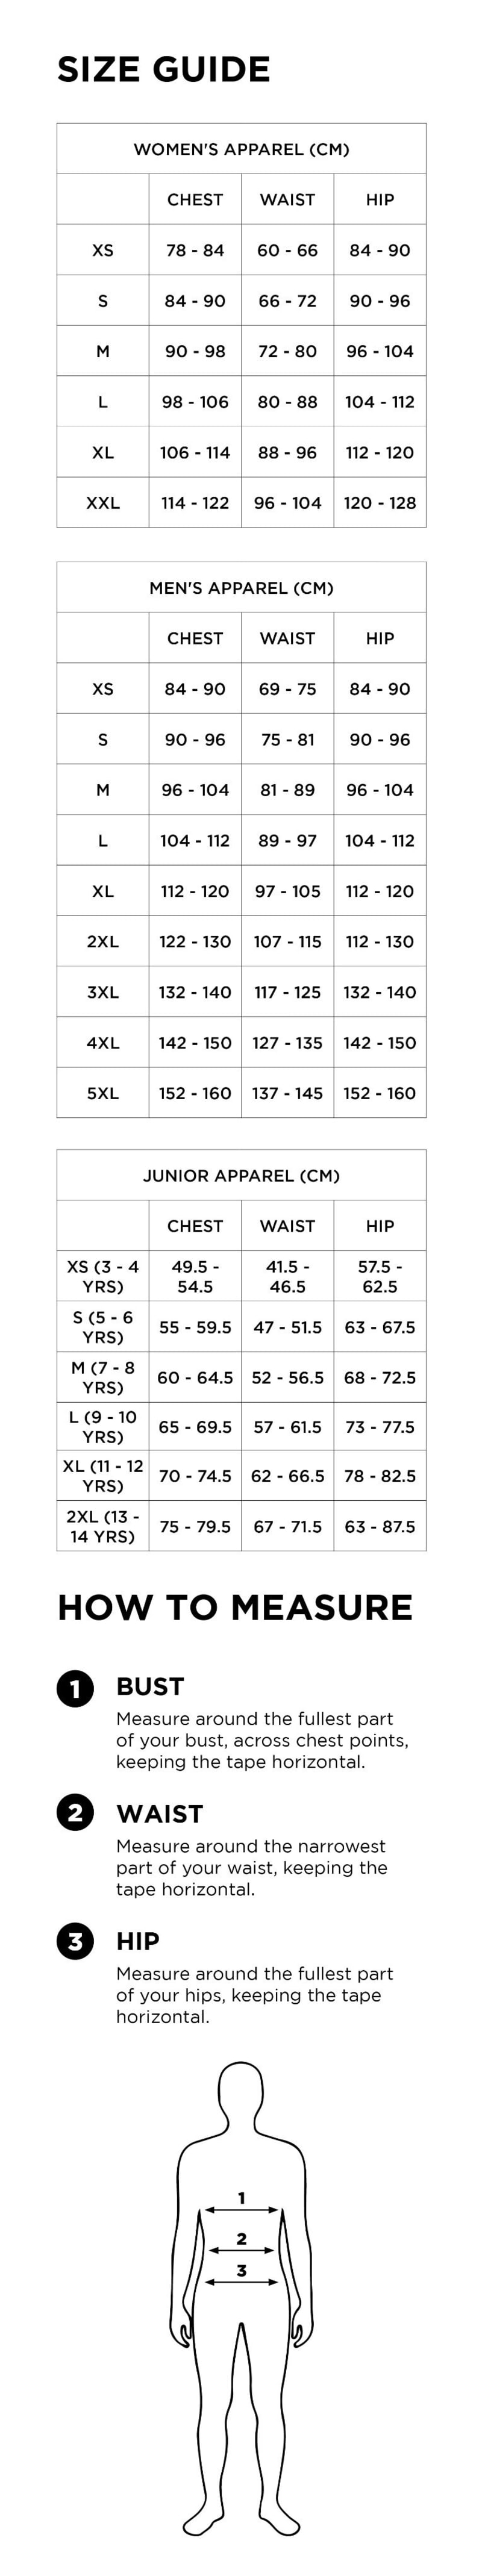 Columbia Apparel Size Guide | Sportsmans Warehouse